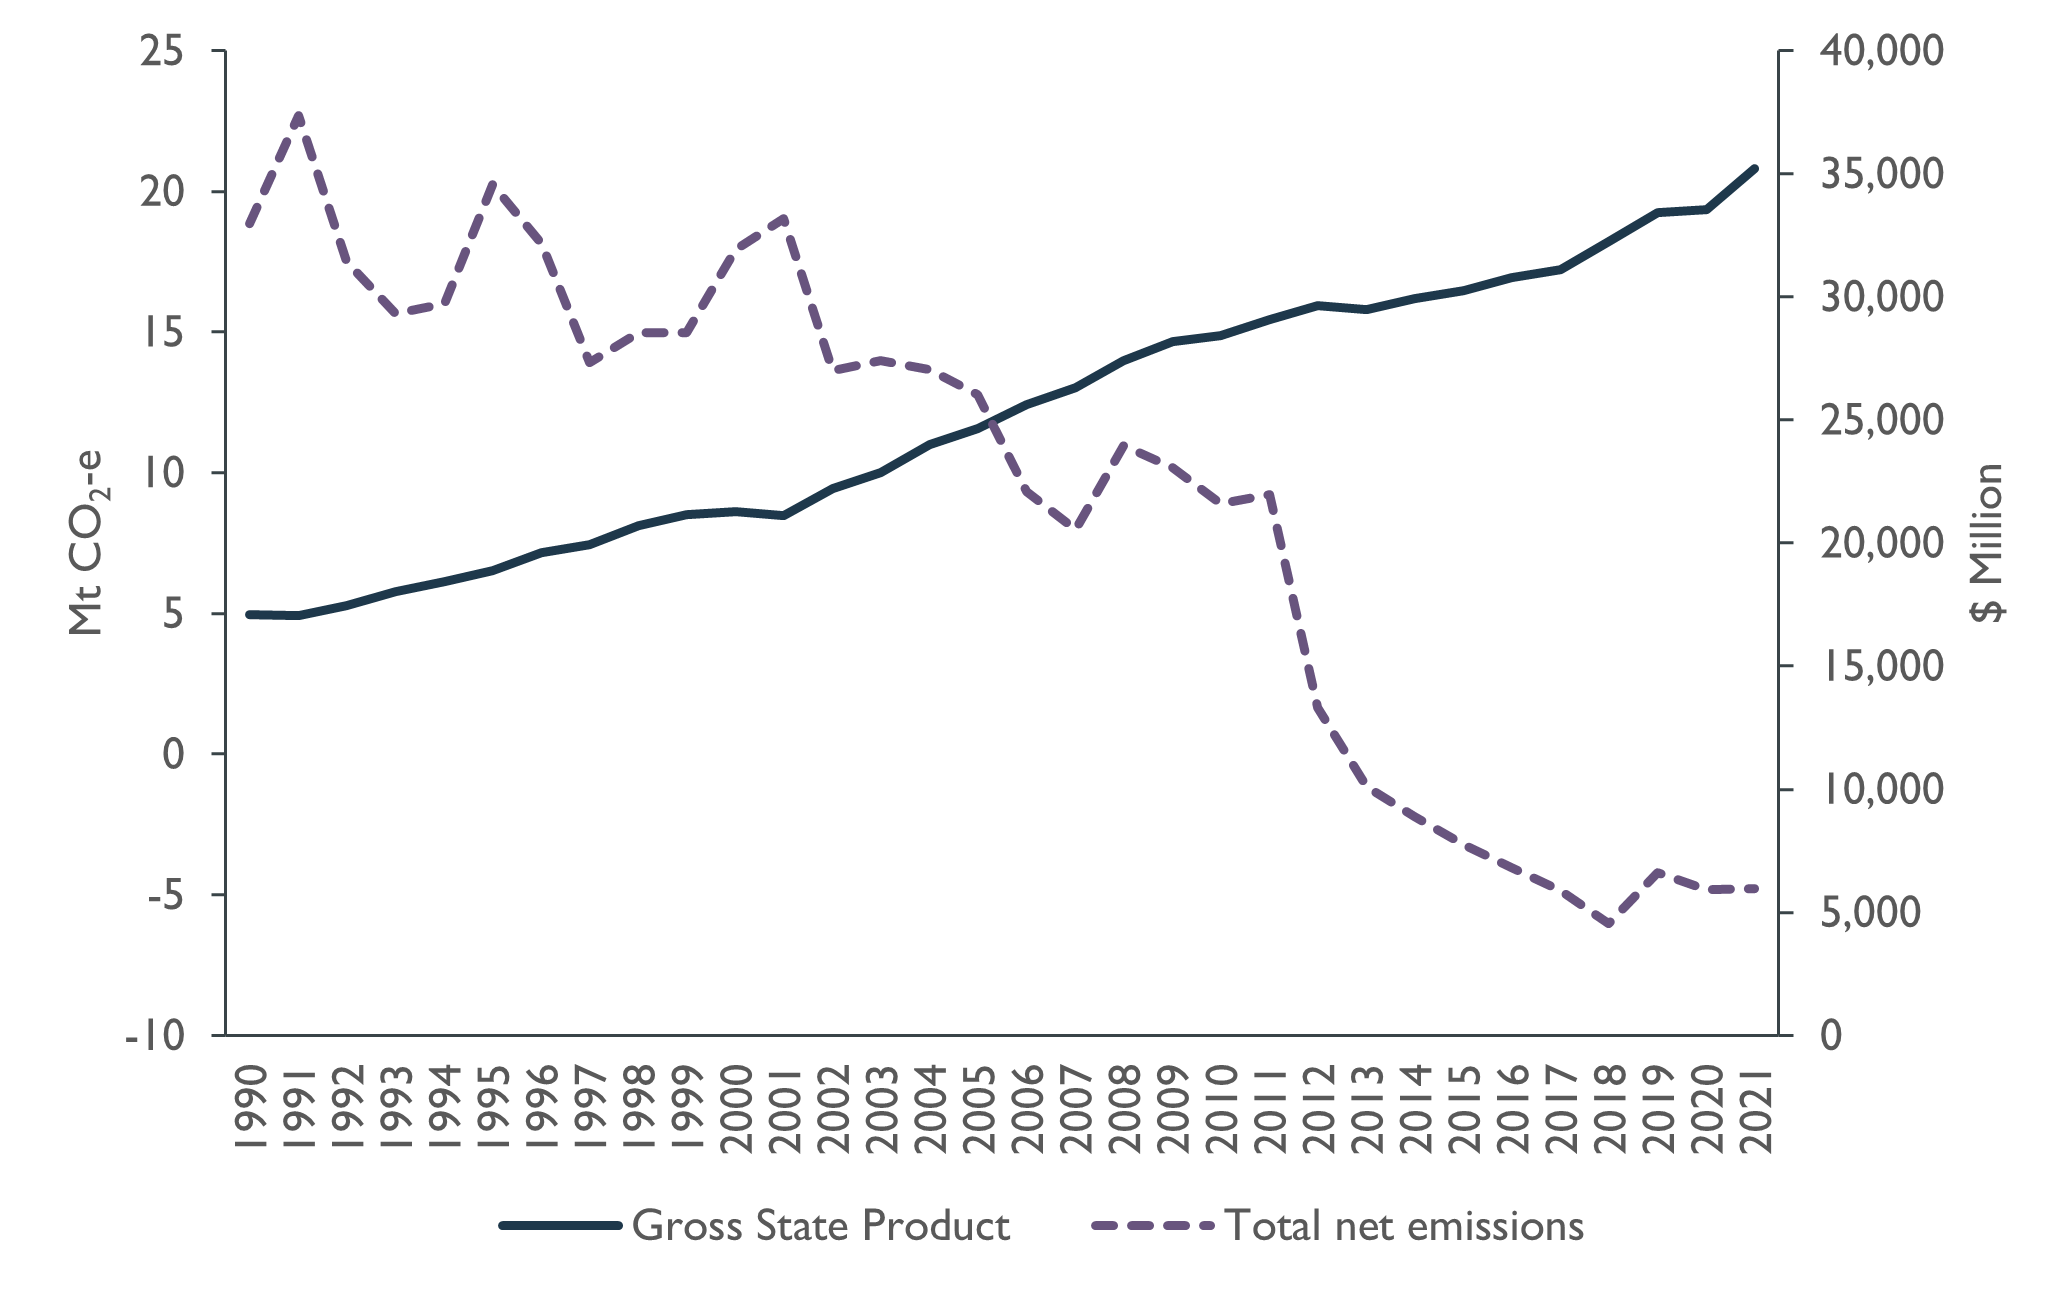 This figure combines two line charts representing Tasmania’s real Gross State Product (GSP), and Tasmania’s total emissions, to show the change in Tasmania’s emissions and GSP from 1990 to 2021. It shows Tasmania’s real GSP steadily increasing by a total of 106.2 per cent over this period (from $17,069,000,000 to $35,195,000,000). The dashed line shows a decrease of 125.5 per cent in Tasmania’s total net emissions over this period, with emissions reaching a peak in 1991 (22.69 megatonnes of carbon dioxide equivalent), declining to achieve negative net emissions in 2013, to minus 4.80 megatonnes of carbon dioxide equivalent in 2021.